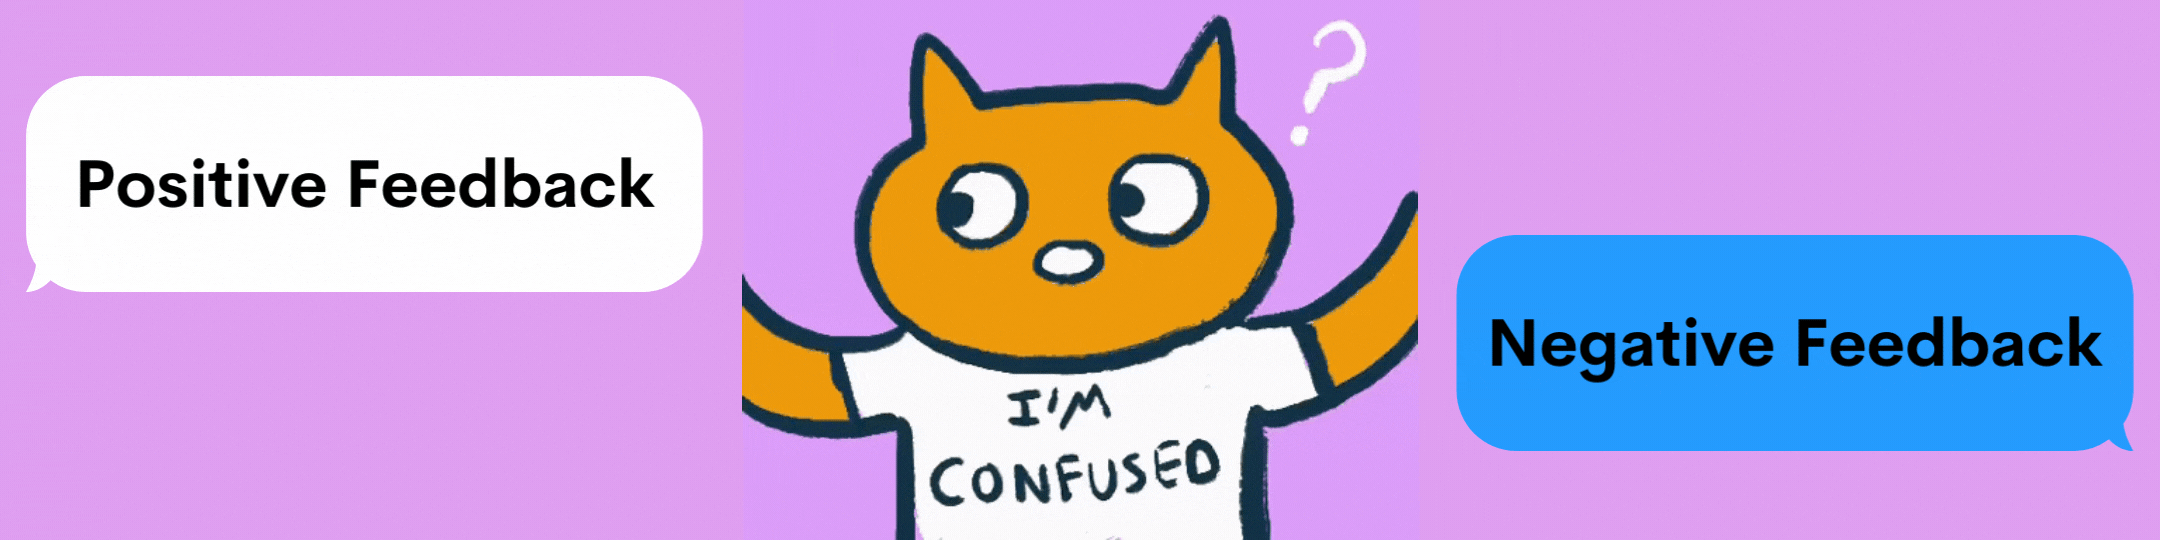 GIF with a cat getting positive and negative feedback. The cat wears a shirt that says, "I'm confused".